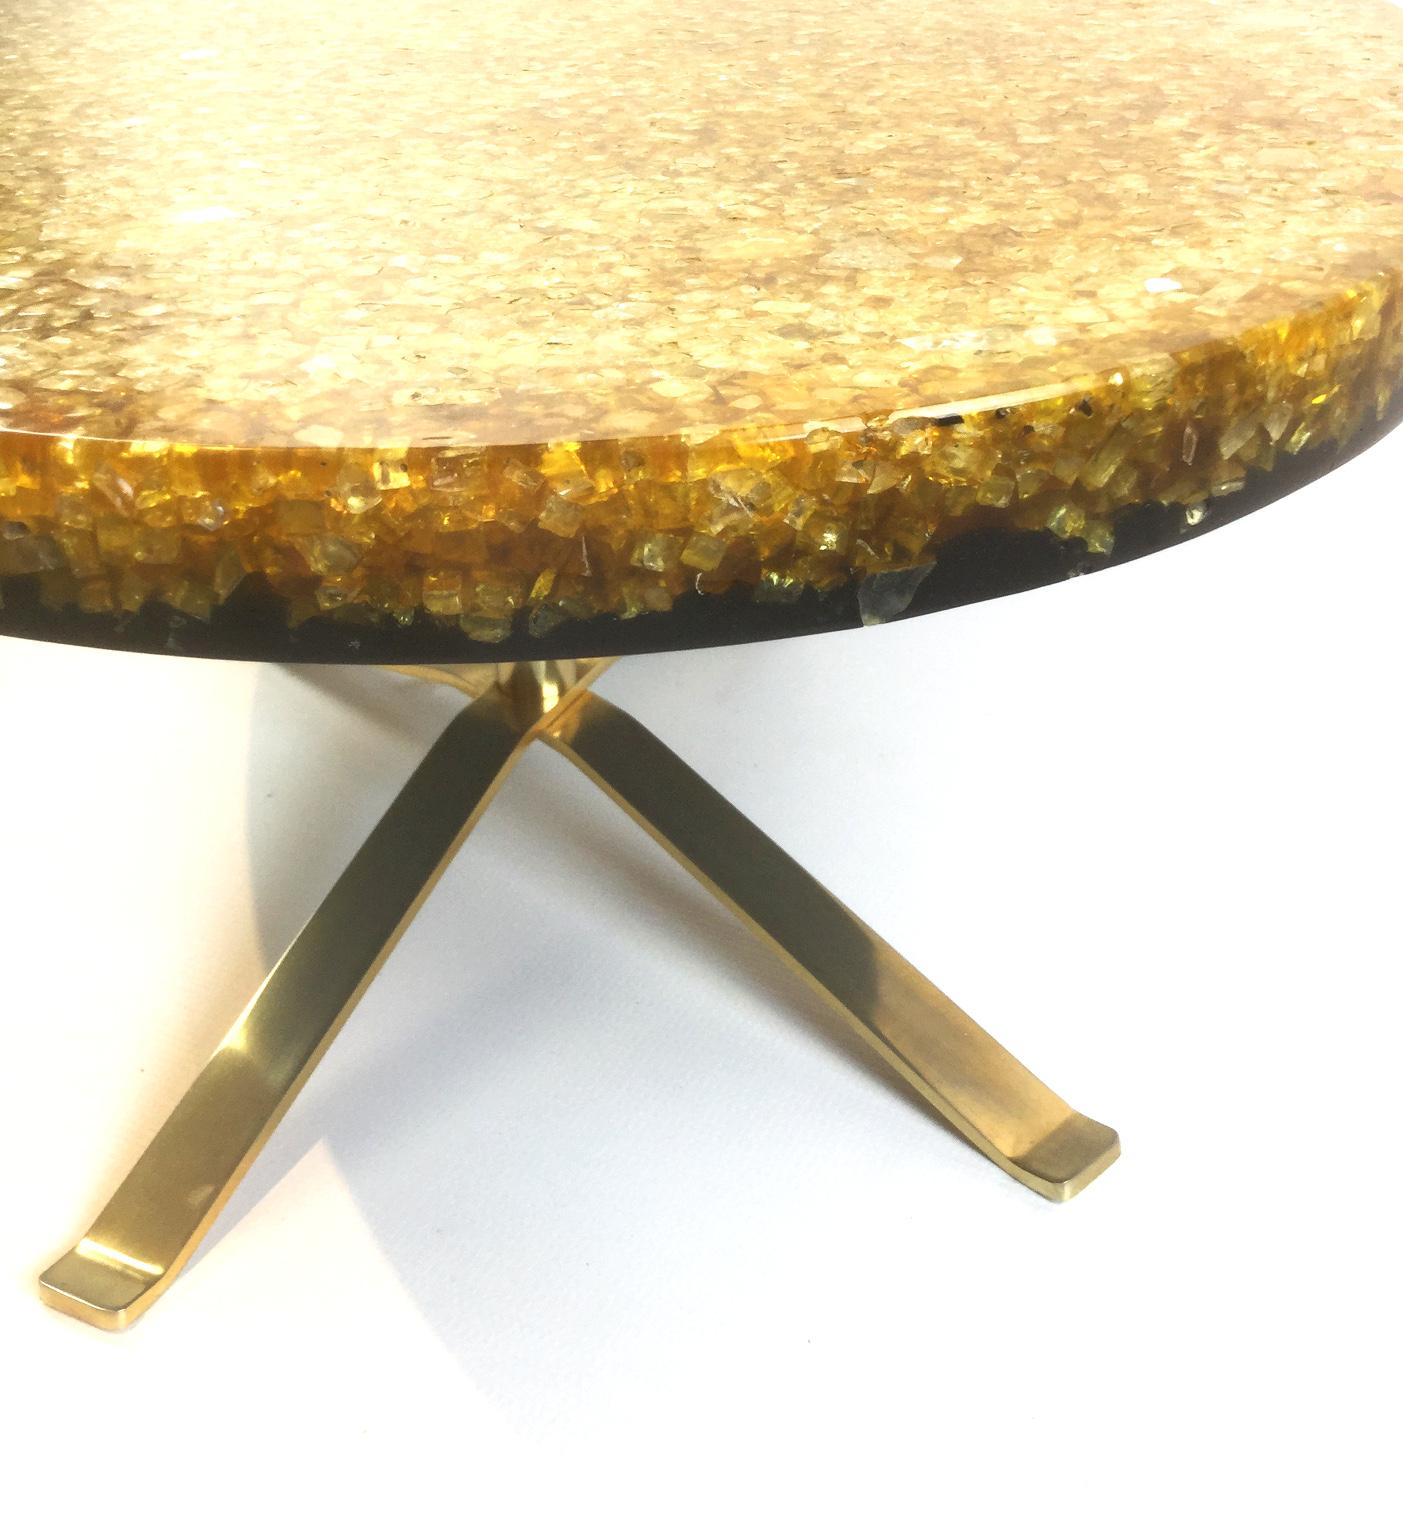 Ellipse coffee table by the biologist and plastician artist Pierre Giraudon 
The table is made from crackled resin with inclusions of broken glass supported by two brass-plated crossed legs

Pierre Giraudon was born in 1923. After a stay in